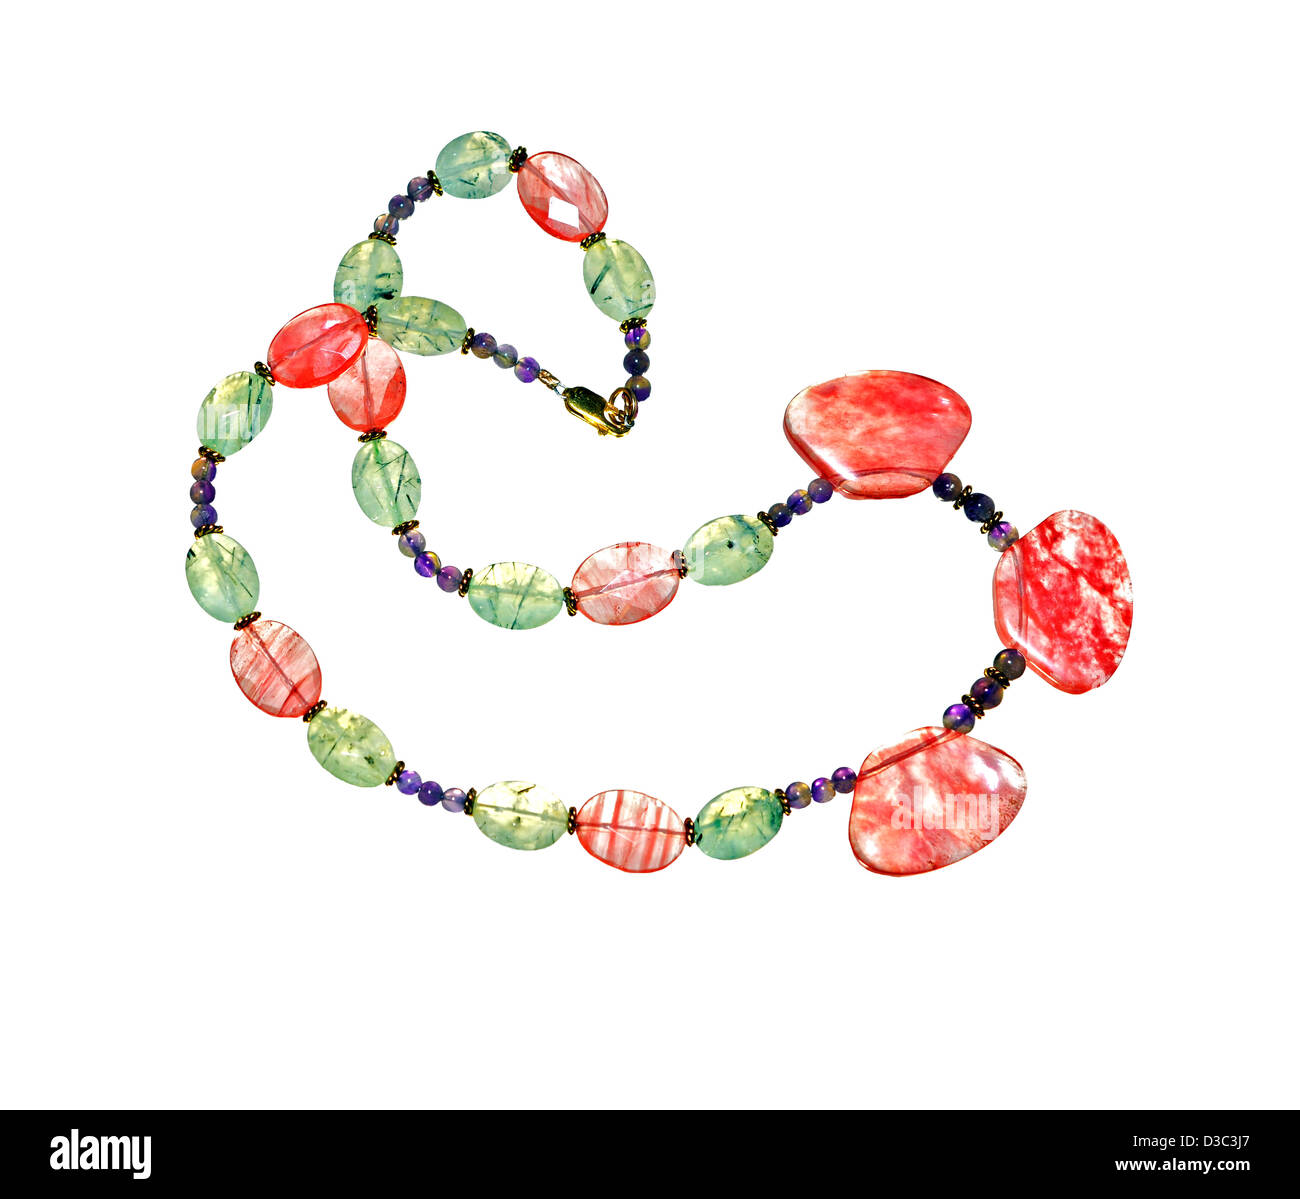 A hand crafted necklace of colorful stones. Stock Photo